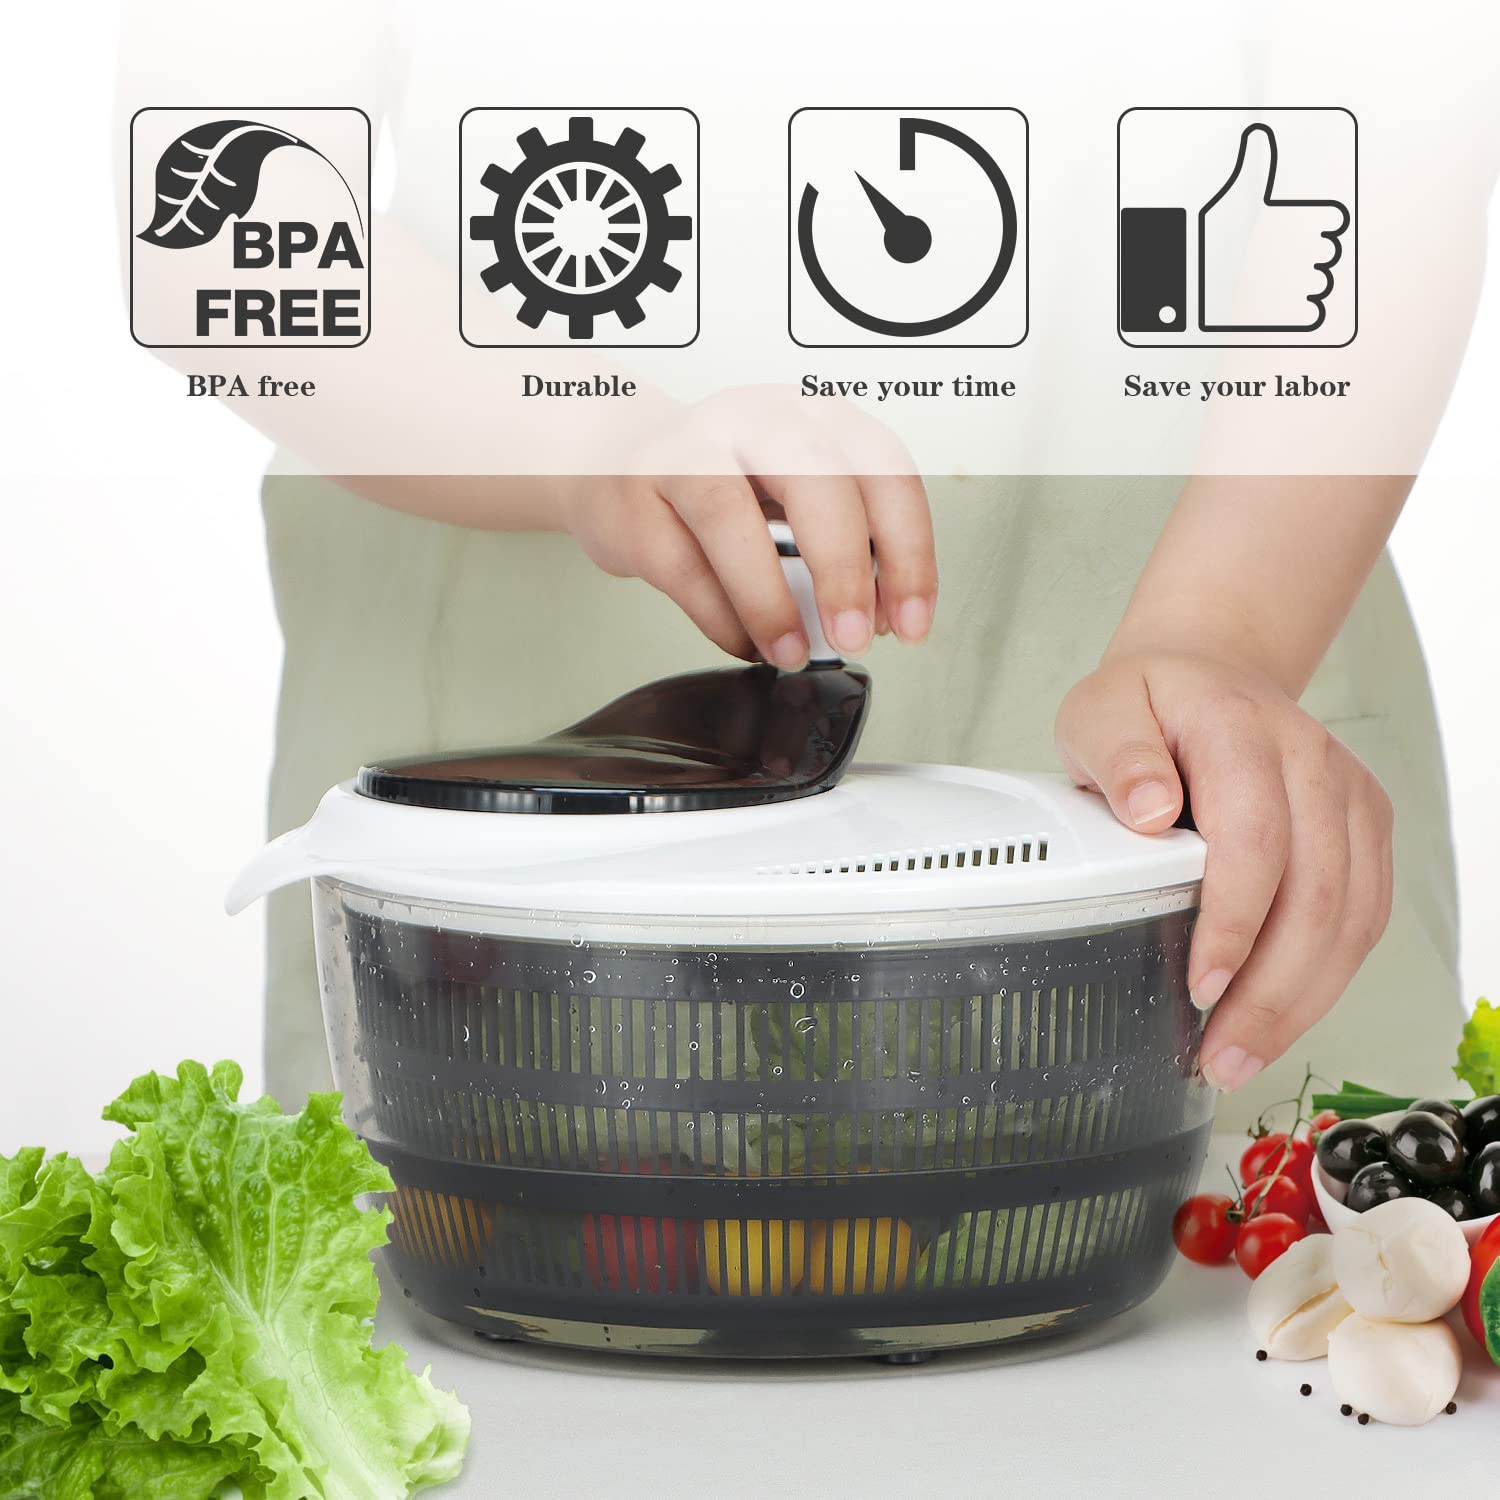 Large Salad Spinner BPA Free-Manual Lettuce Dryer and Vegetable Washer with  Quick Dry Design,Draining Lettce and Vegetable with Ease,including Clear